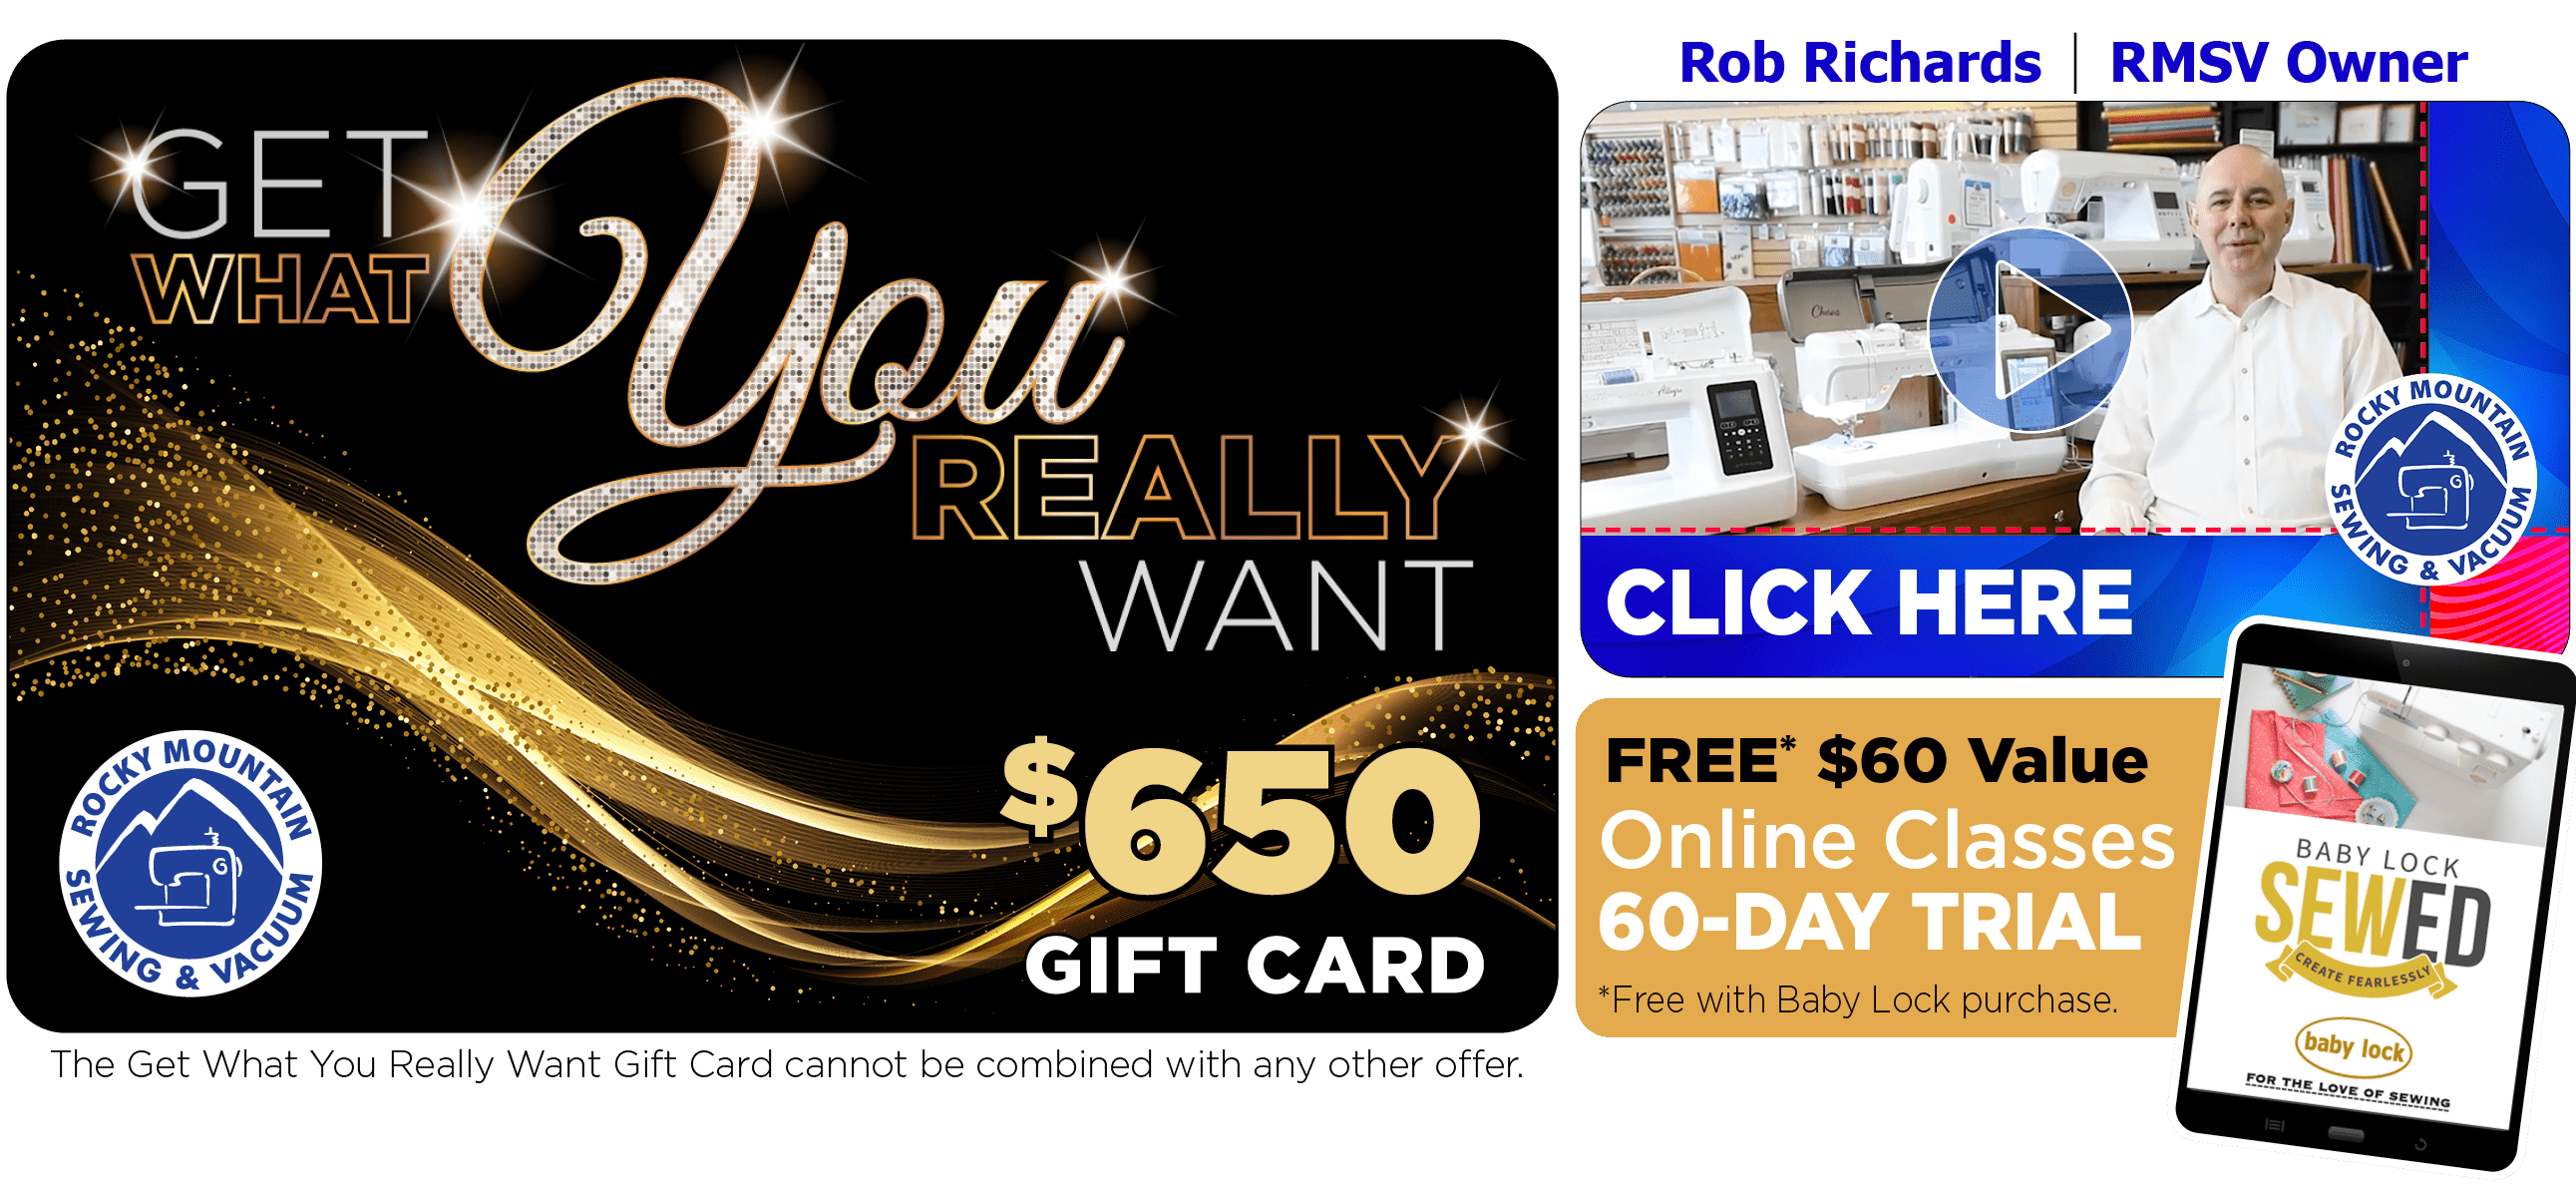 Get What You Really Want $650 Gift Card with Purchase